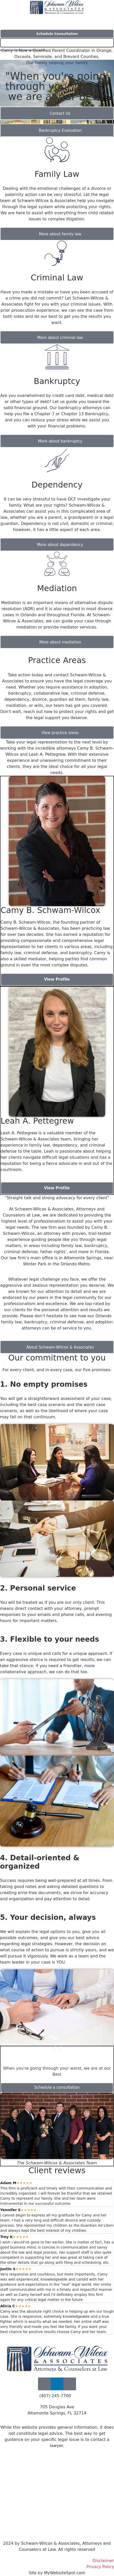 Schwam-Wilcox & Associates, Attorneys and Counselors at Law - The Villages FL Lawyers